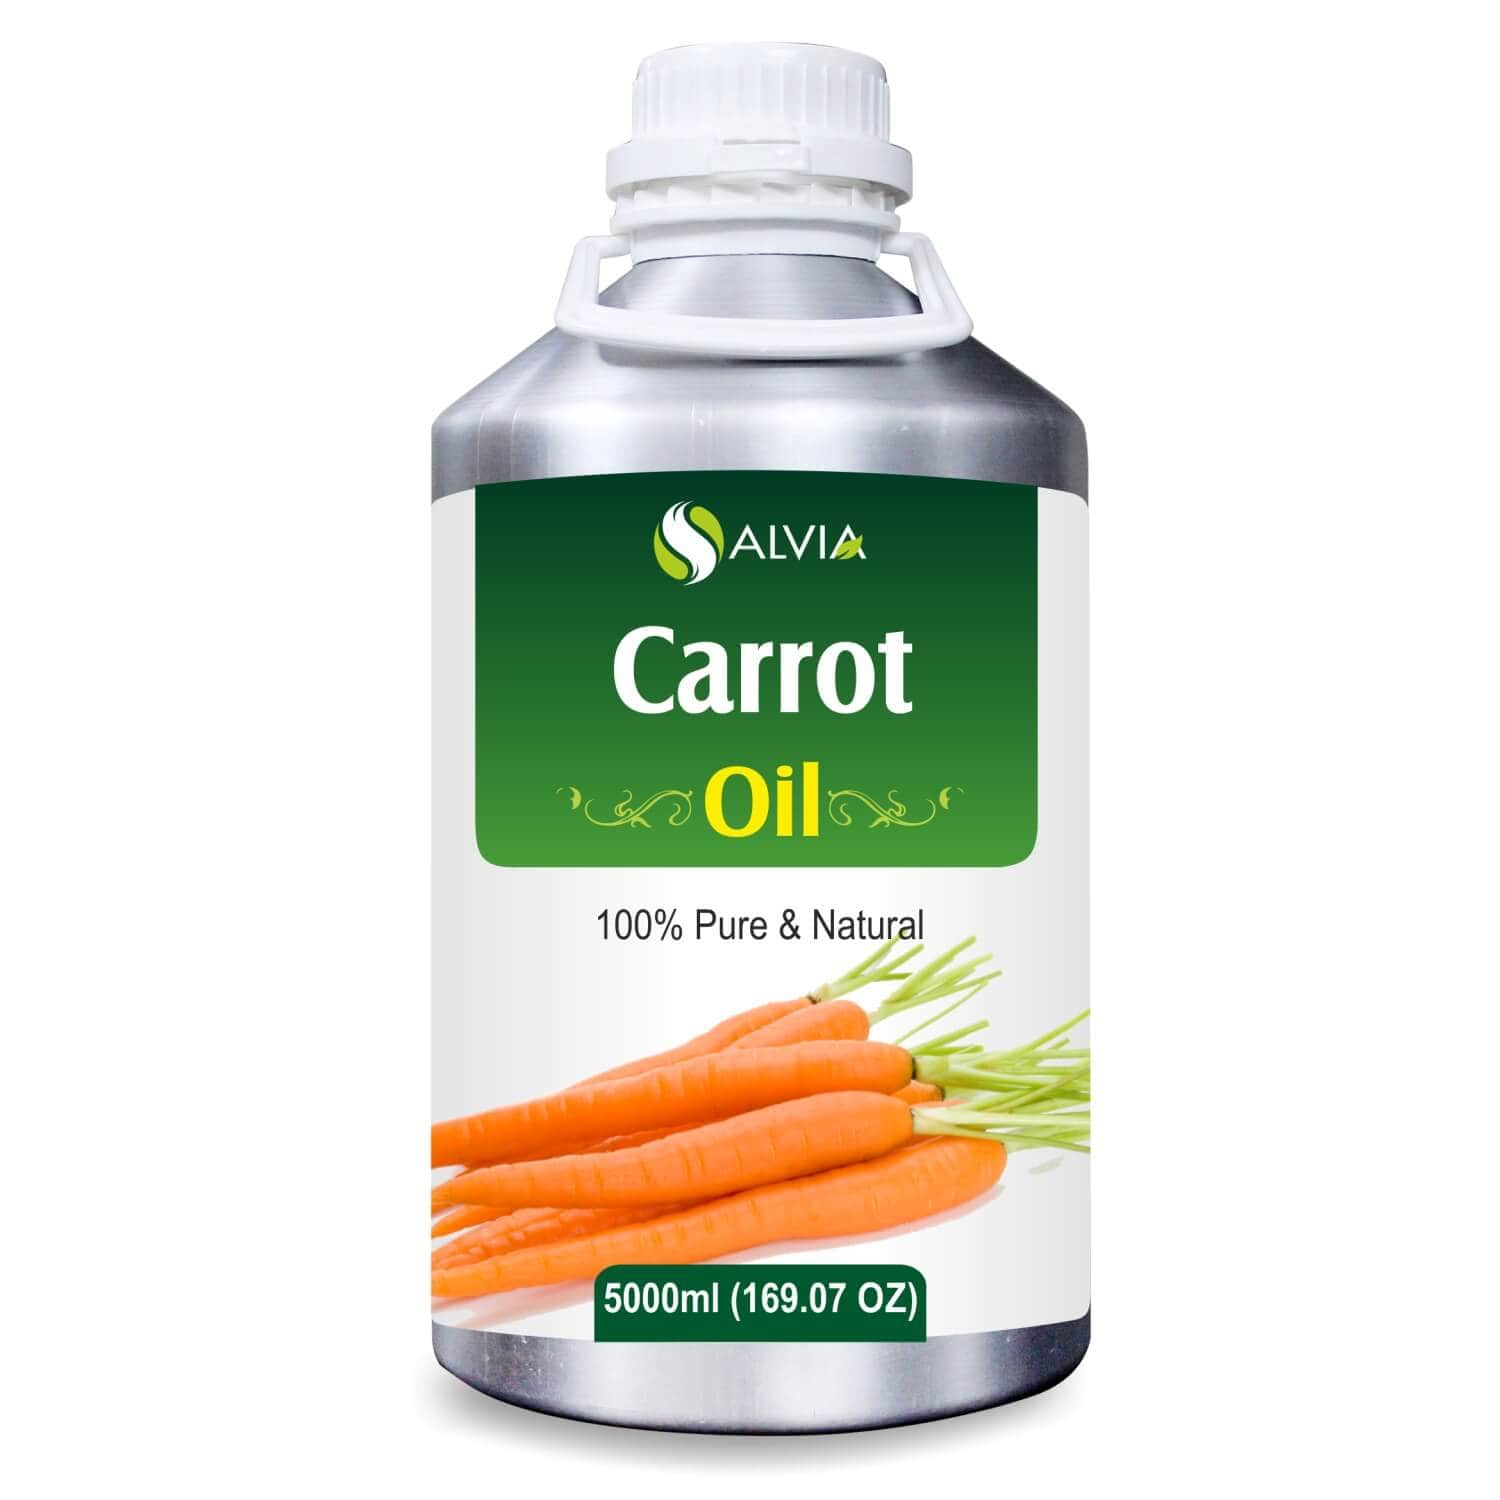 Salvia Natural Essential Oils 5000ml Carrot Oil (Daucus carota) Pure Undiluted Natural Essential Oil Anti-Aging Properties, Revitalizes & Tones Skin, Promotes Cellular Regeneration, Aromatherapy, and More!